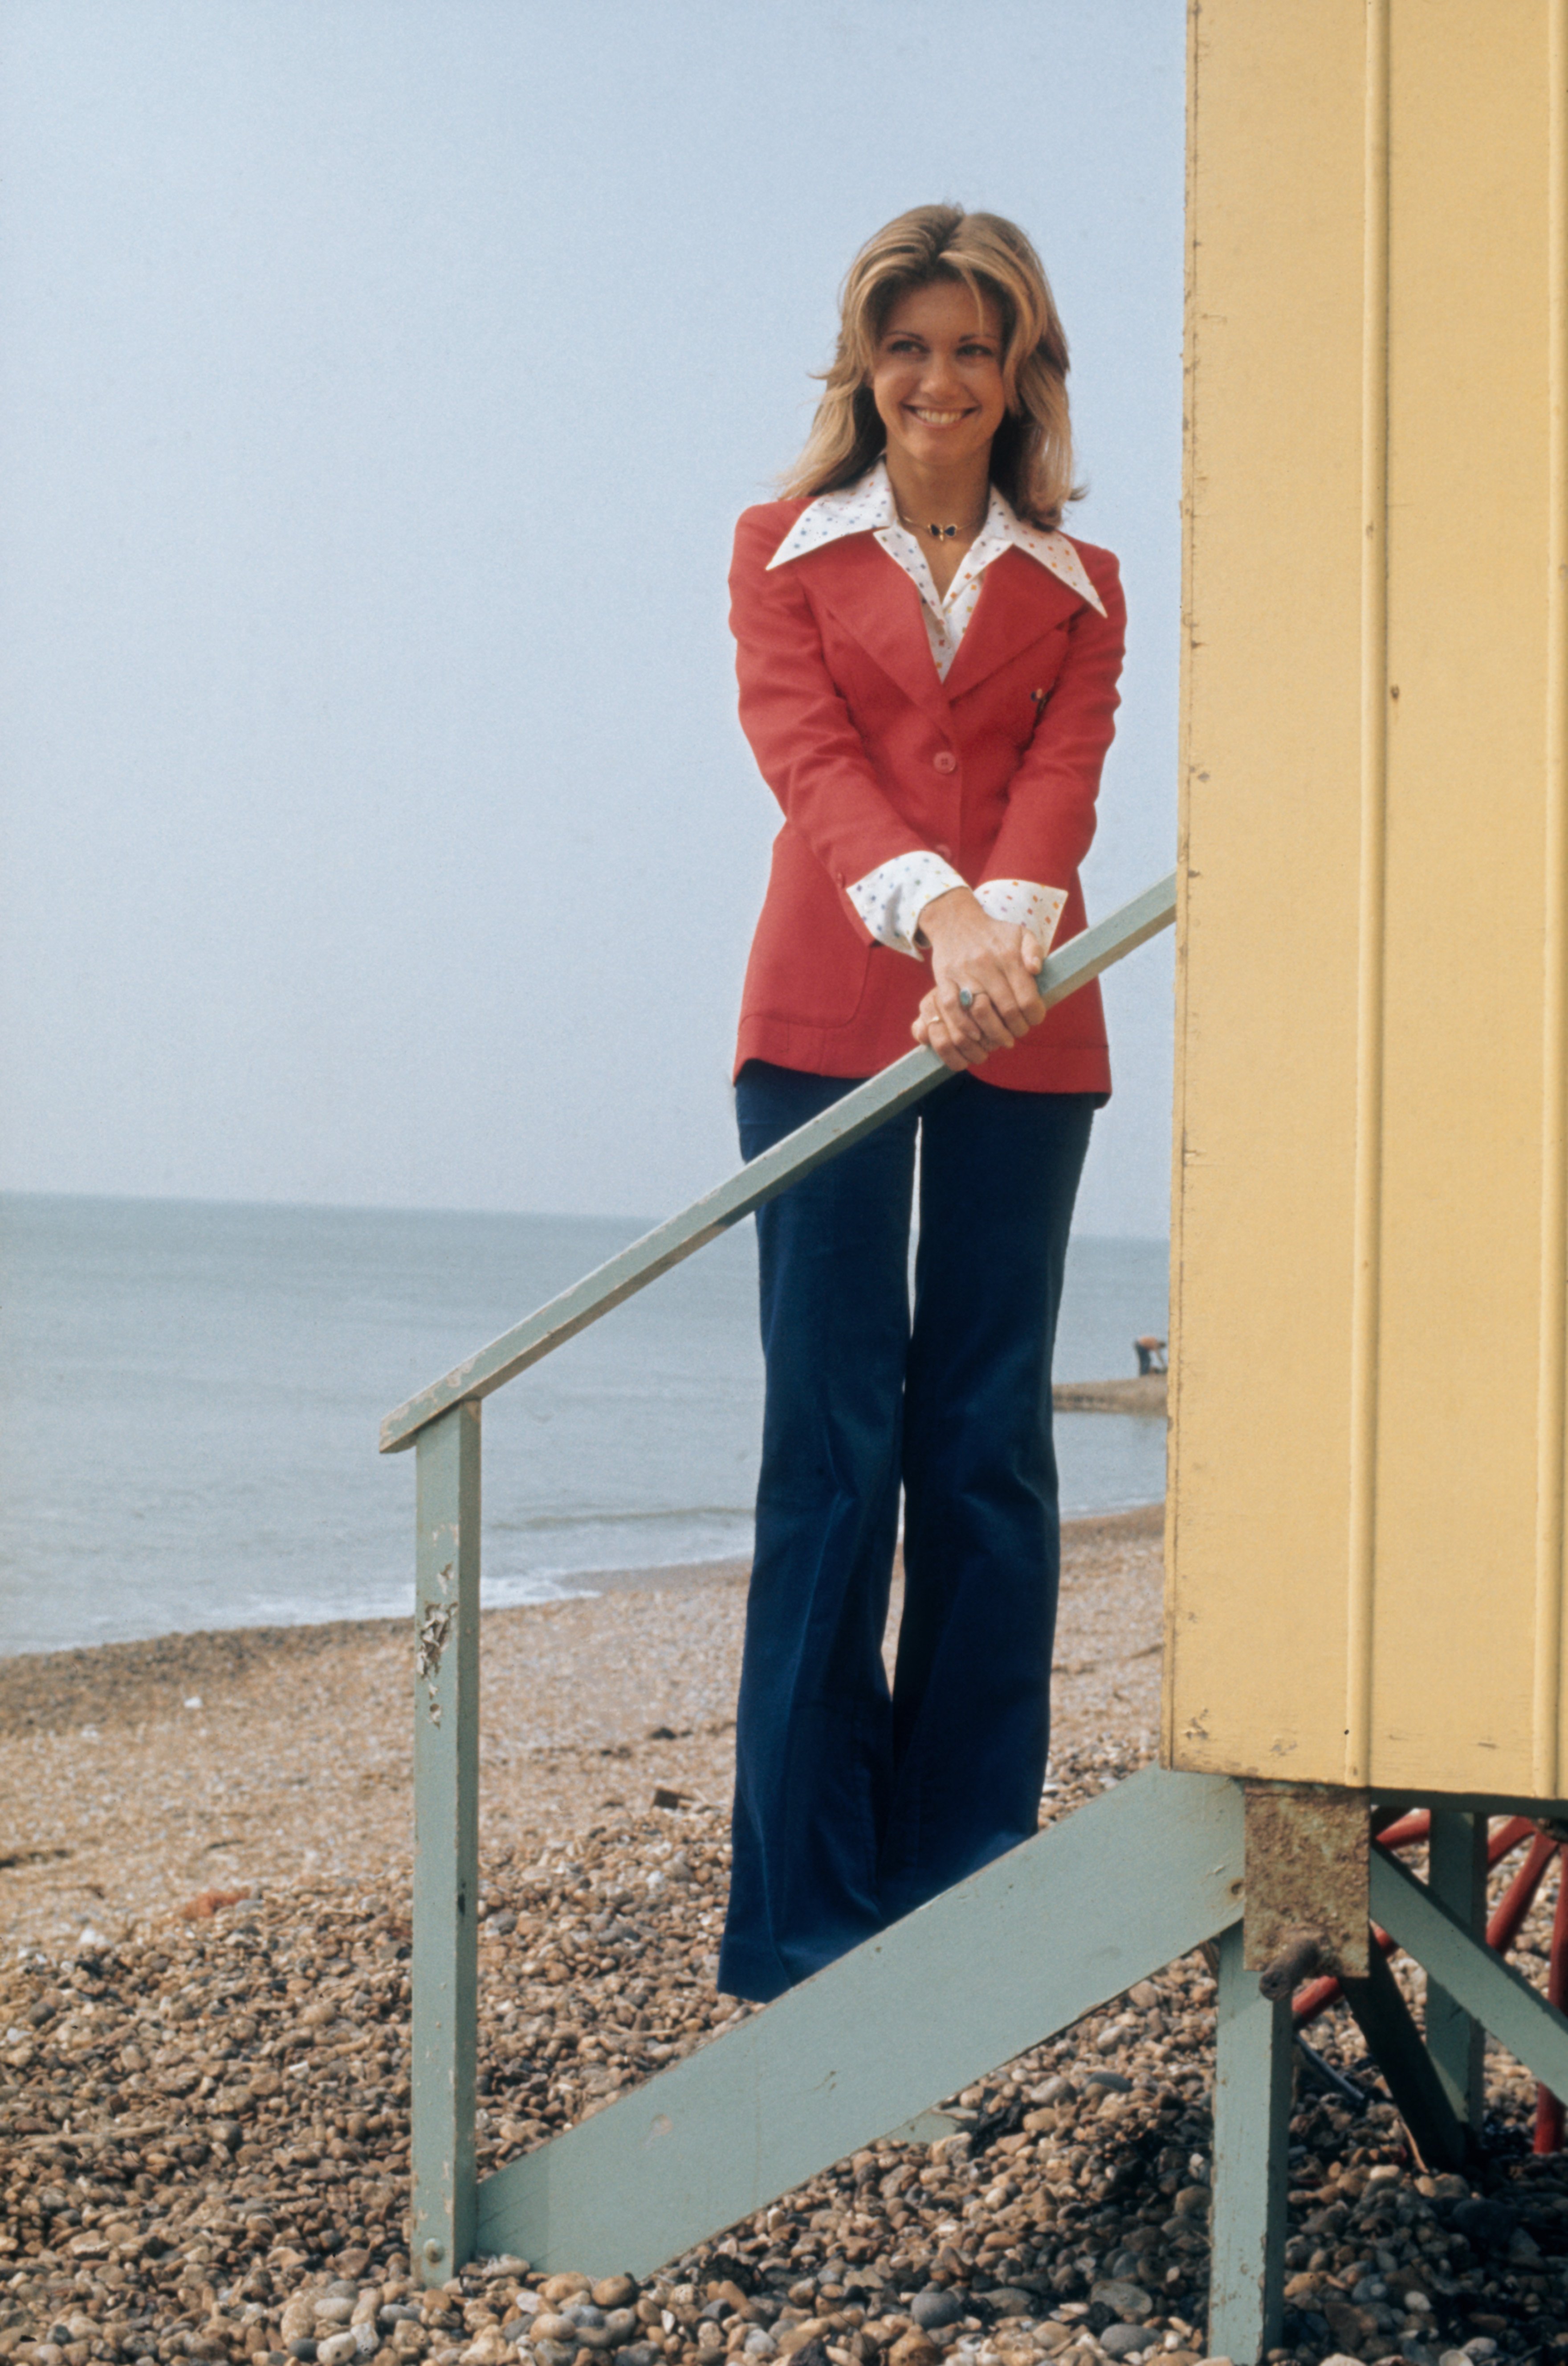 British-born actress Olivia Newton-John poses on the steps of a beach hut, circa 1975 | Source: Getty Images